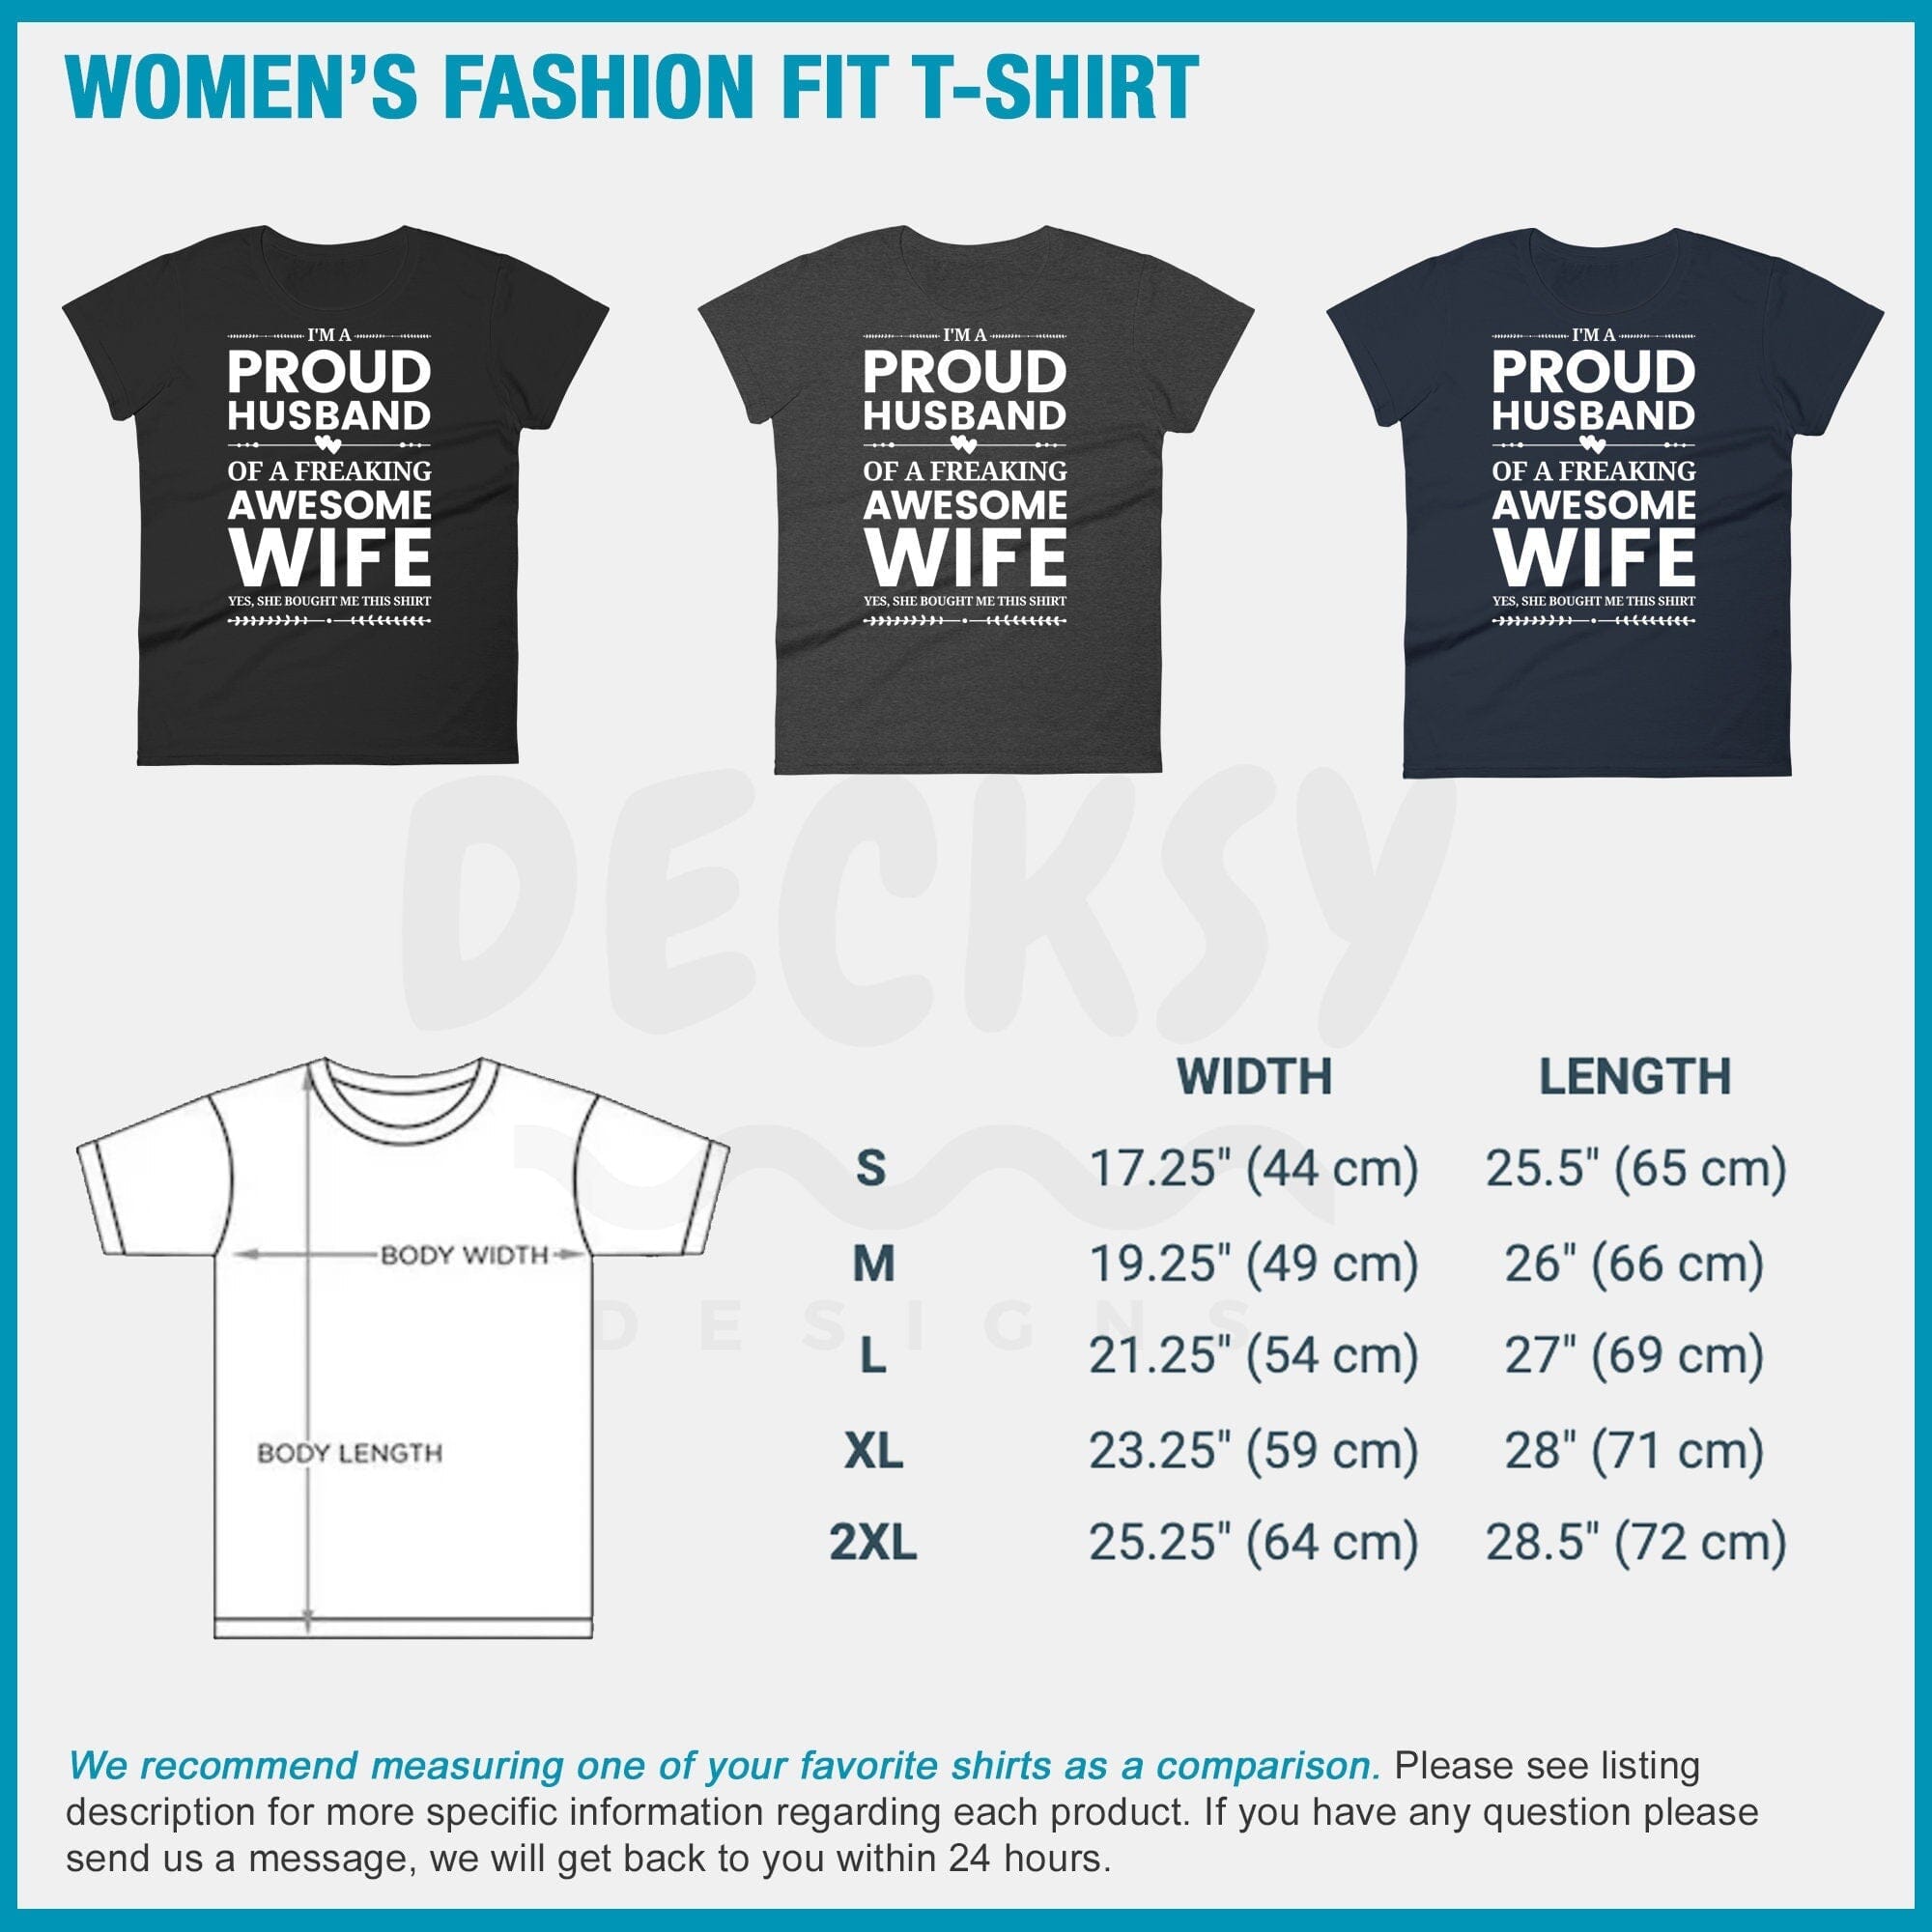 Funny Shirt for Husband, Anniversary Gift From Wife-Clothing:Gender-Neutral Adult Clothing:Tops & Tees:T-shirts:Graphic Tees-DecksyDesigns